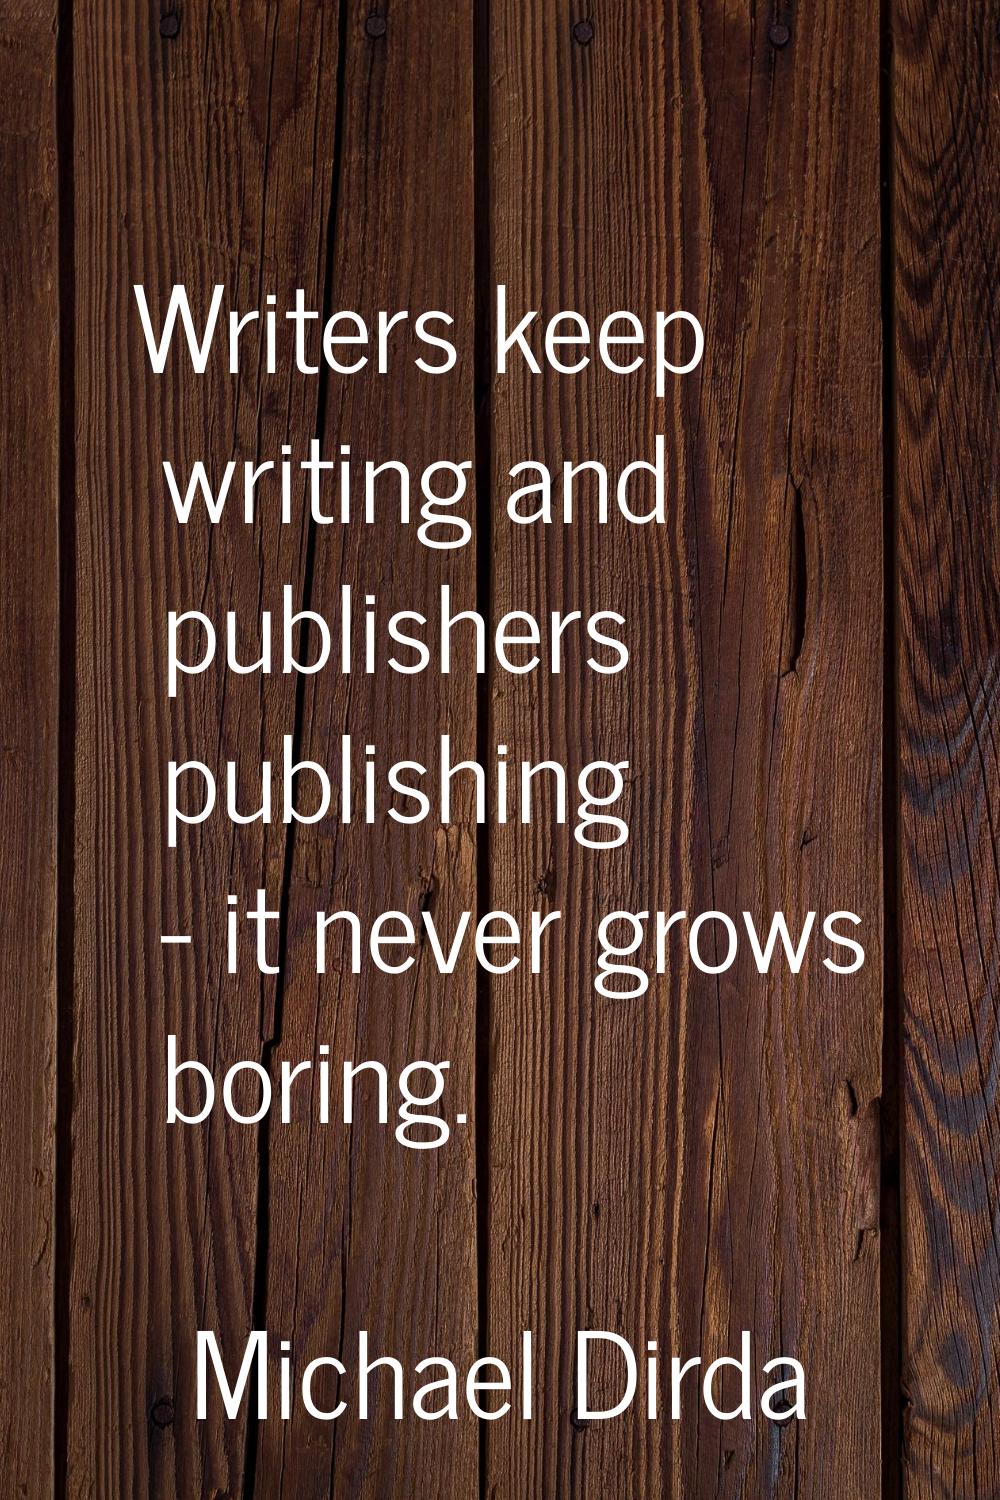 Writers keep writing and publishers publishing - it never grows boring.